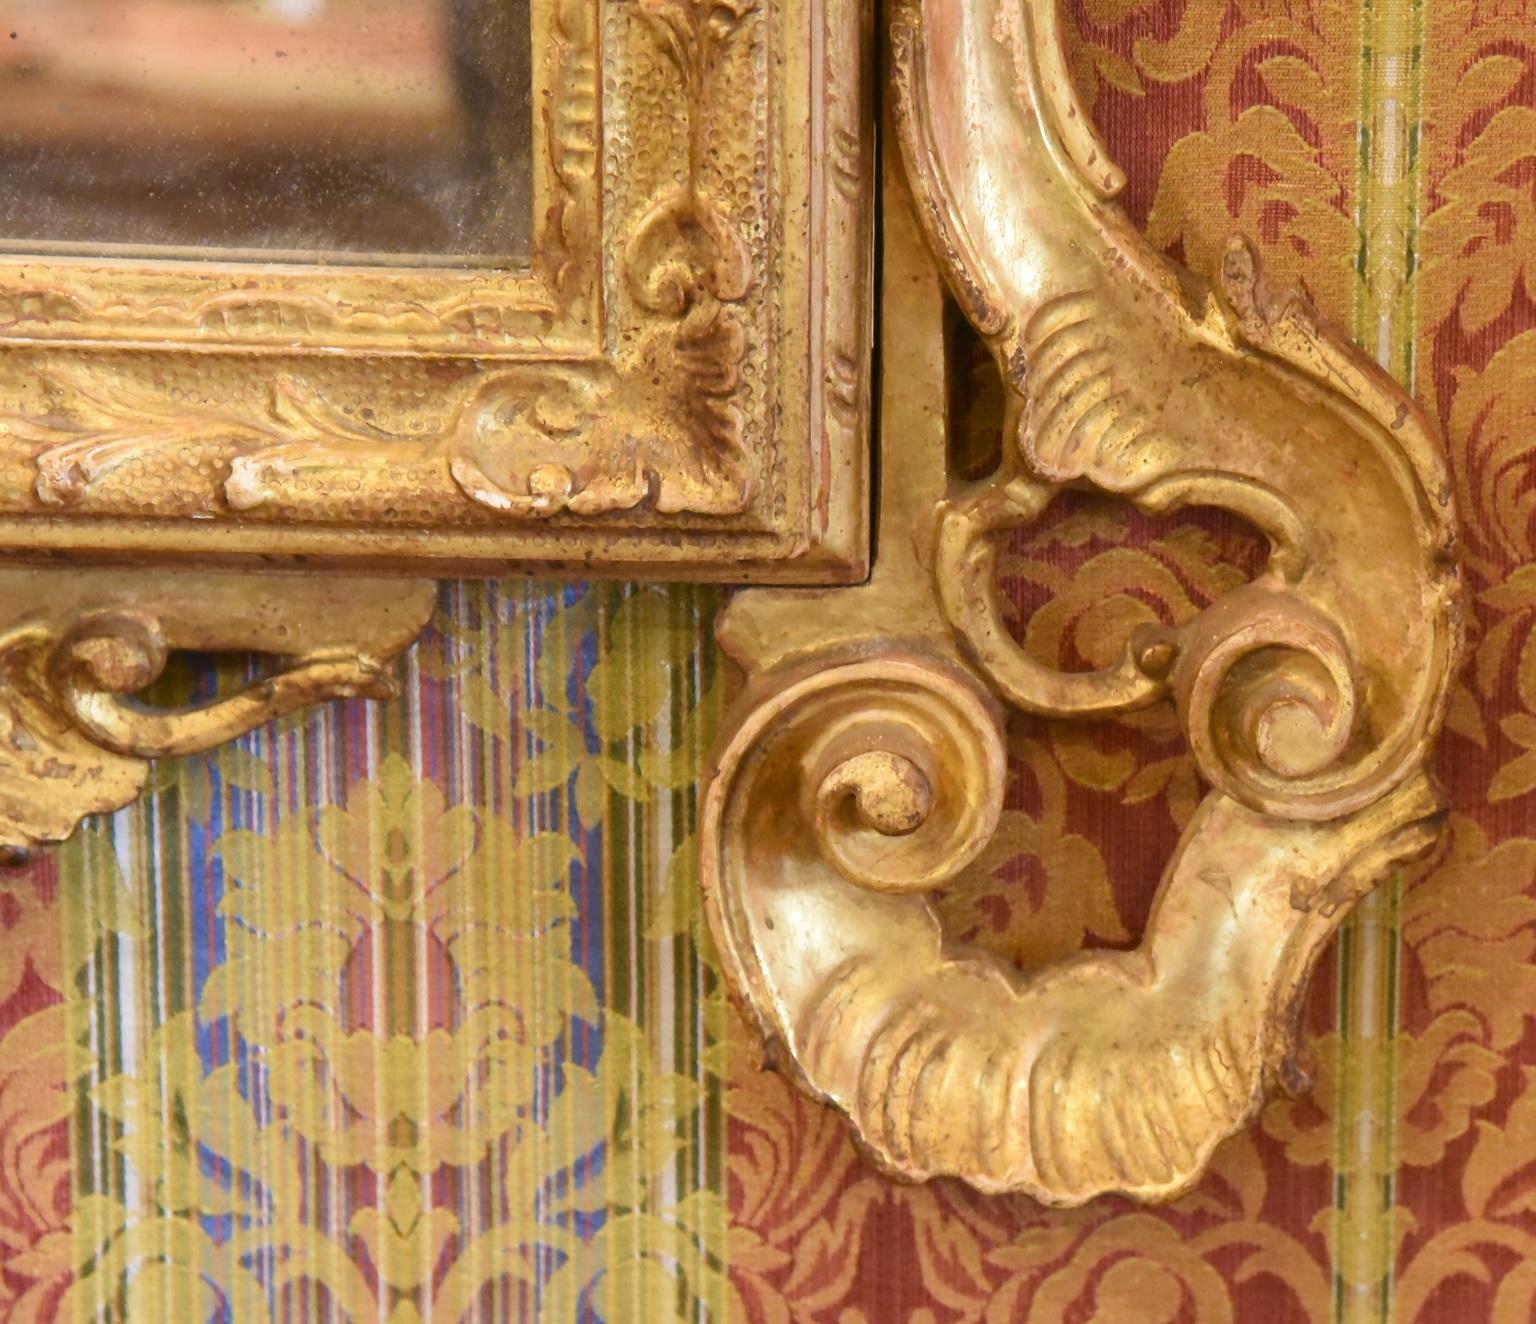 Italian mirror from the 1800s in Louis XV style, finely carved, gilded with pure gold leaves. Handmade glass in Mercury.

This object is subject to the superintendence of the fine arts, therefore it must be accompanied by free circulation, release